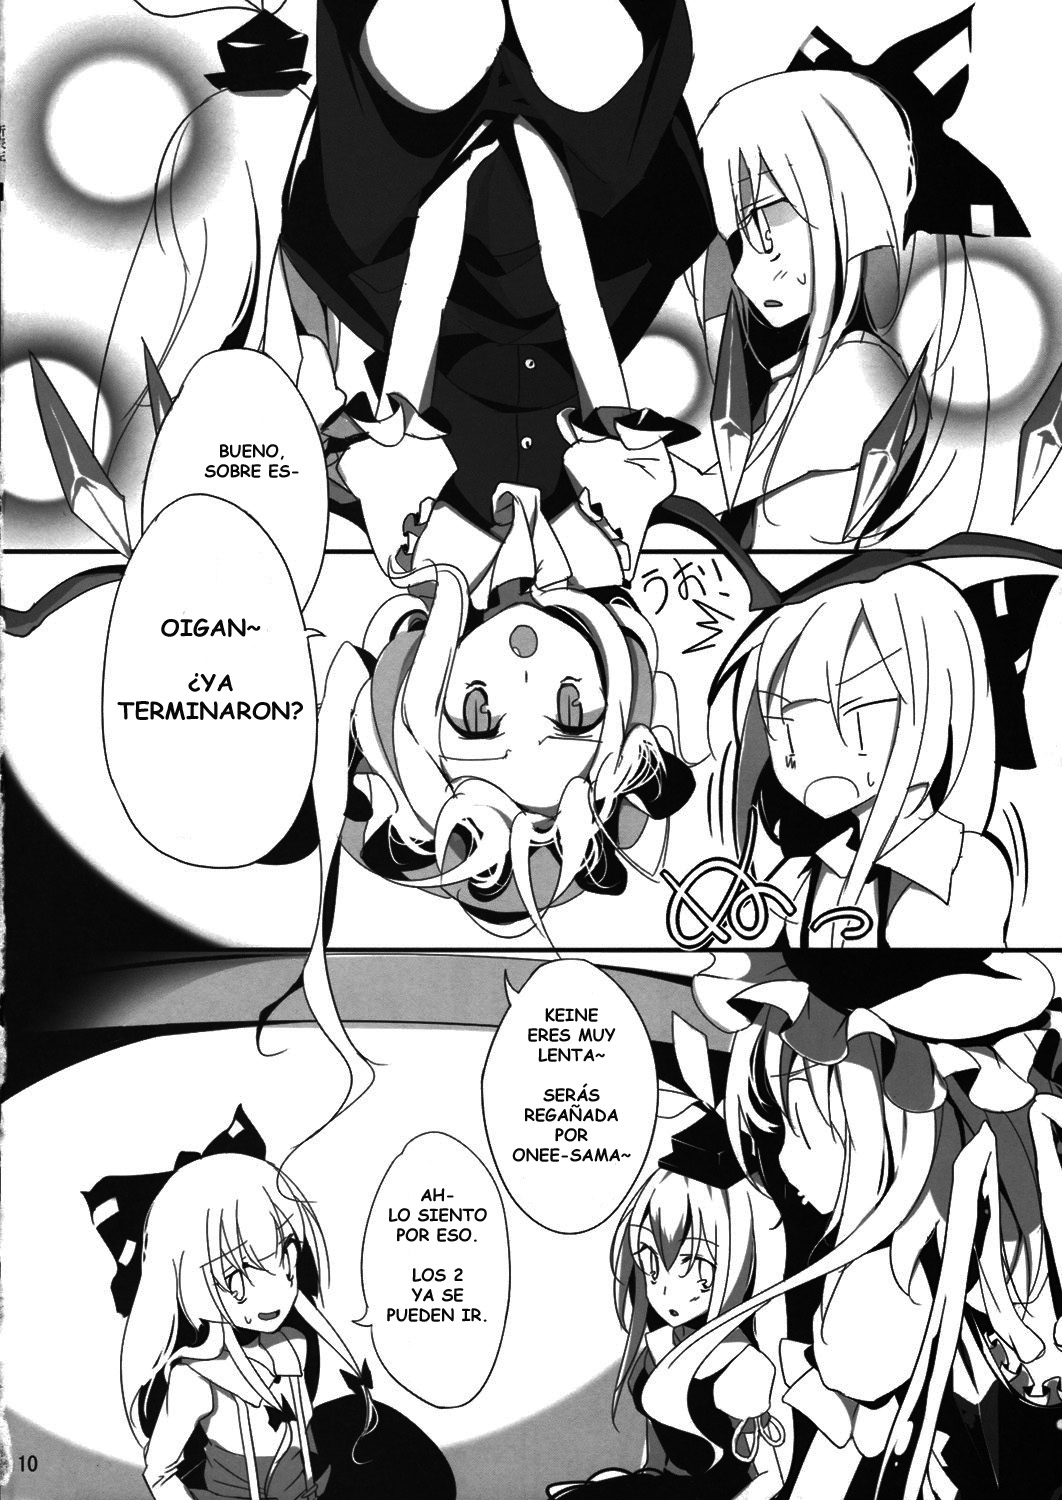 (C76) [Usotsukiya, Oppore-Coppore (BeLL, Oouso)] Flandre Student (Touhou Project) [Spanish] 9